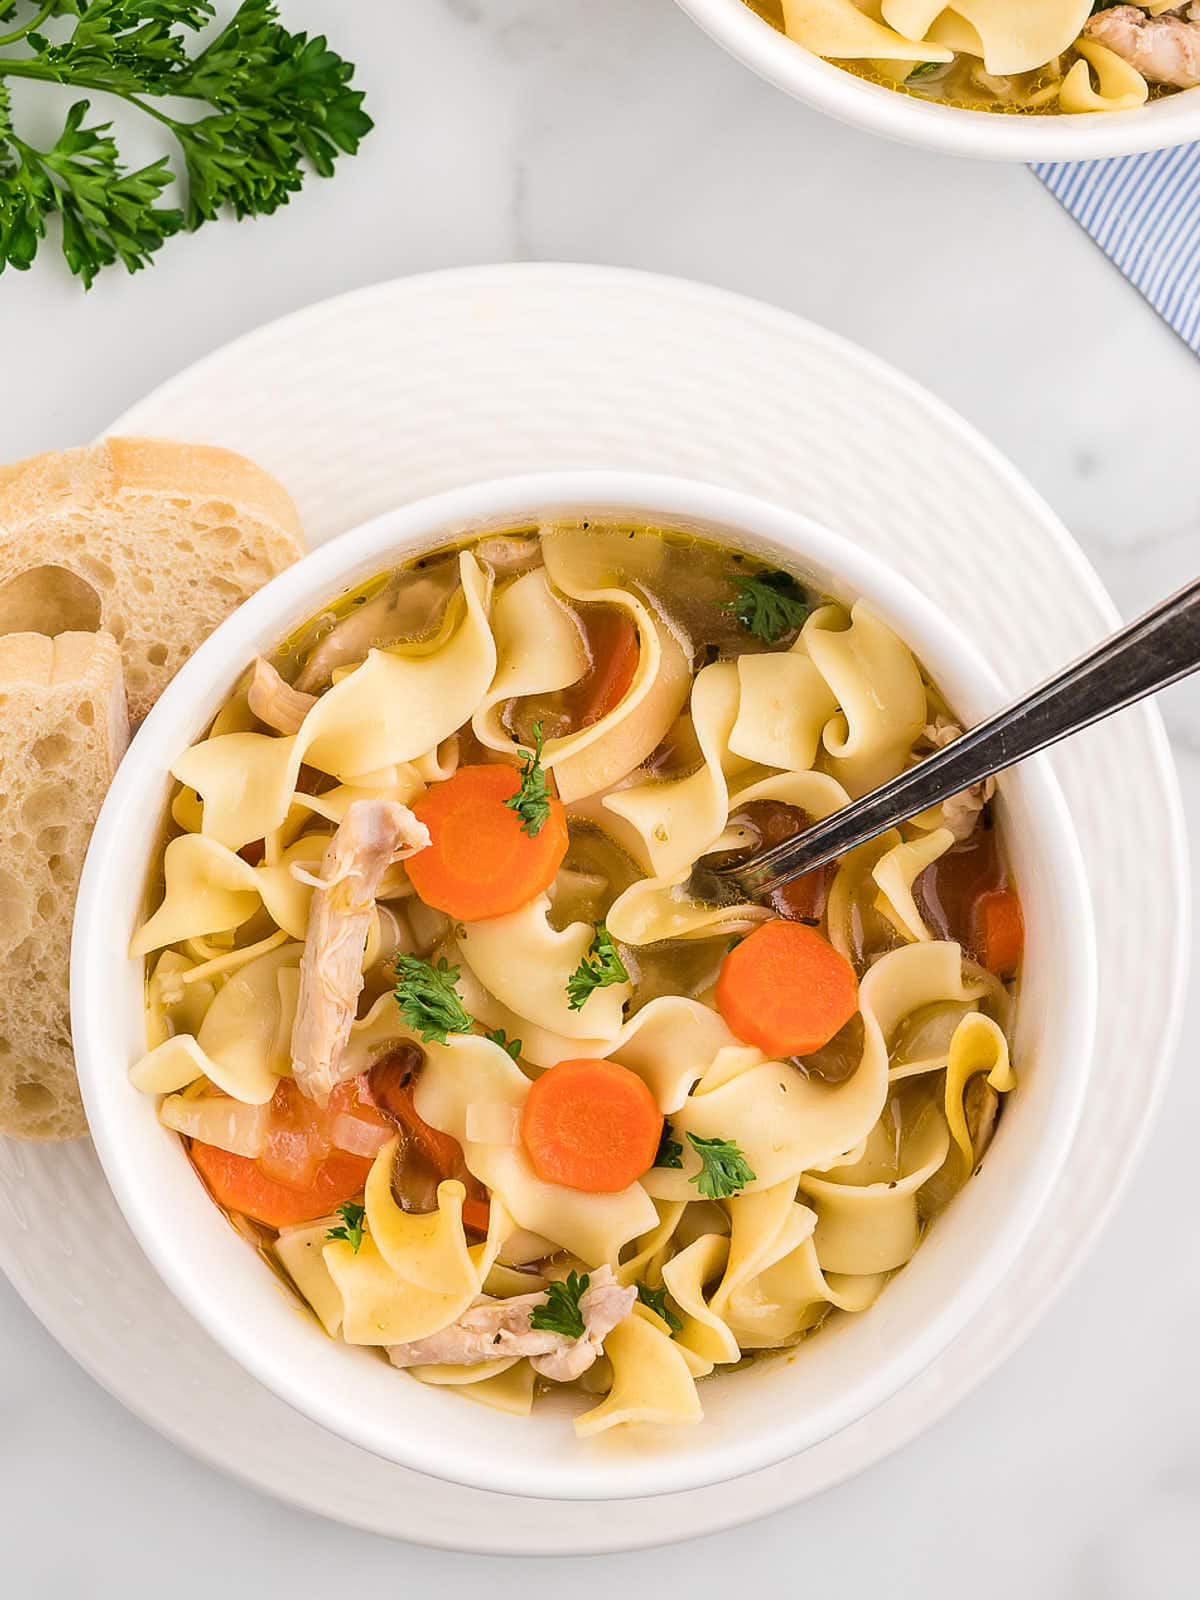 Chicken Noodle Soup in a white bowl served with a slice of bread.